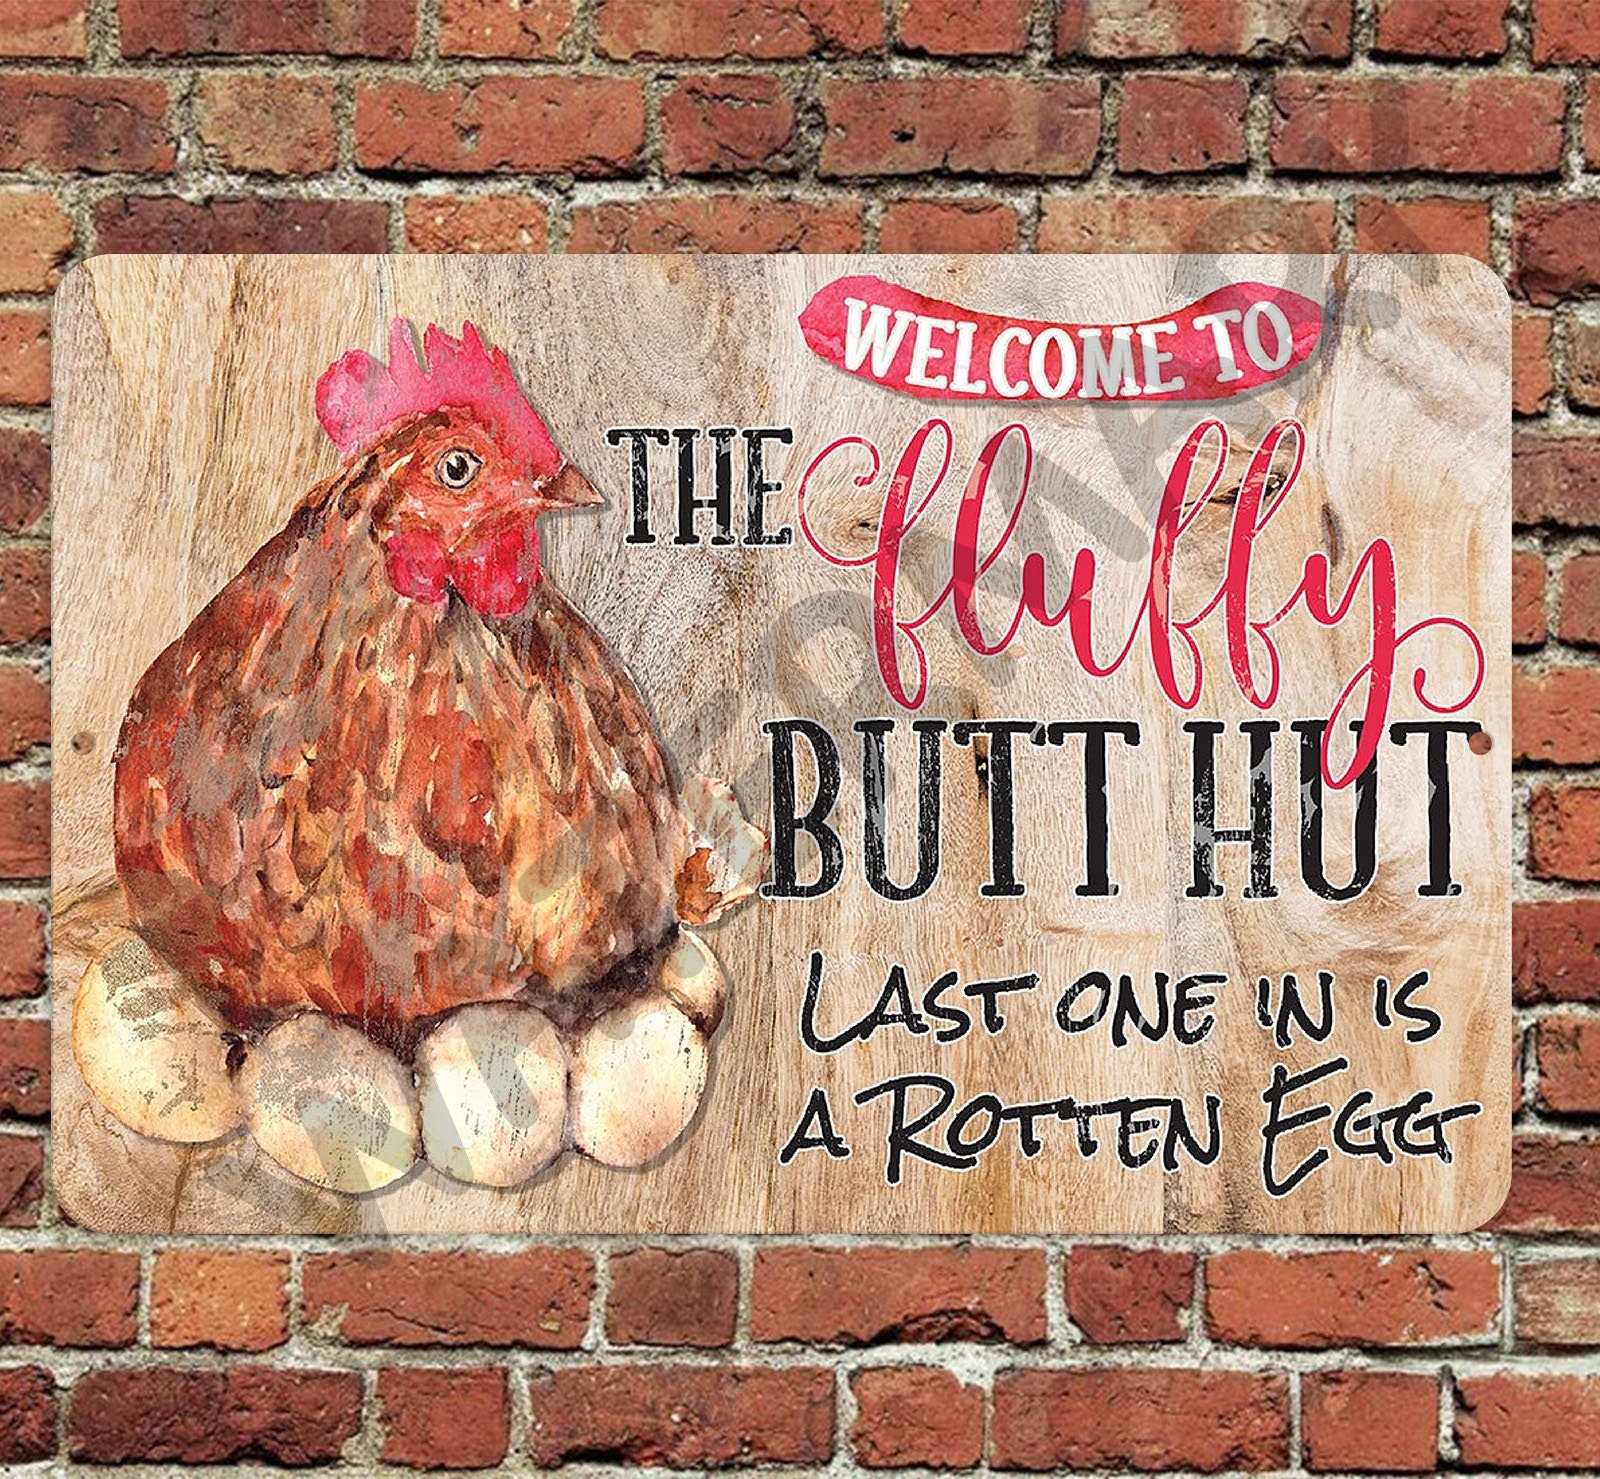 Rotten Egg Sticker for Sale by drawforpun